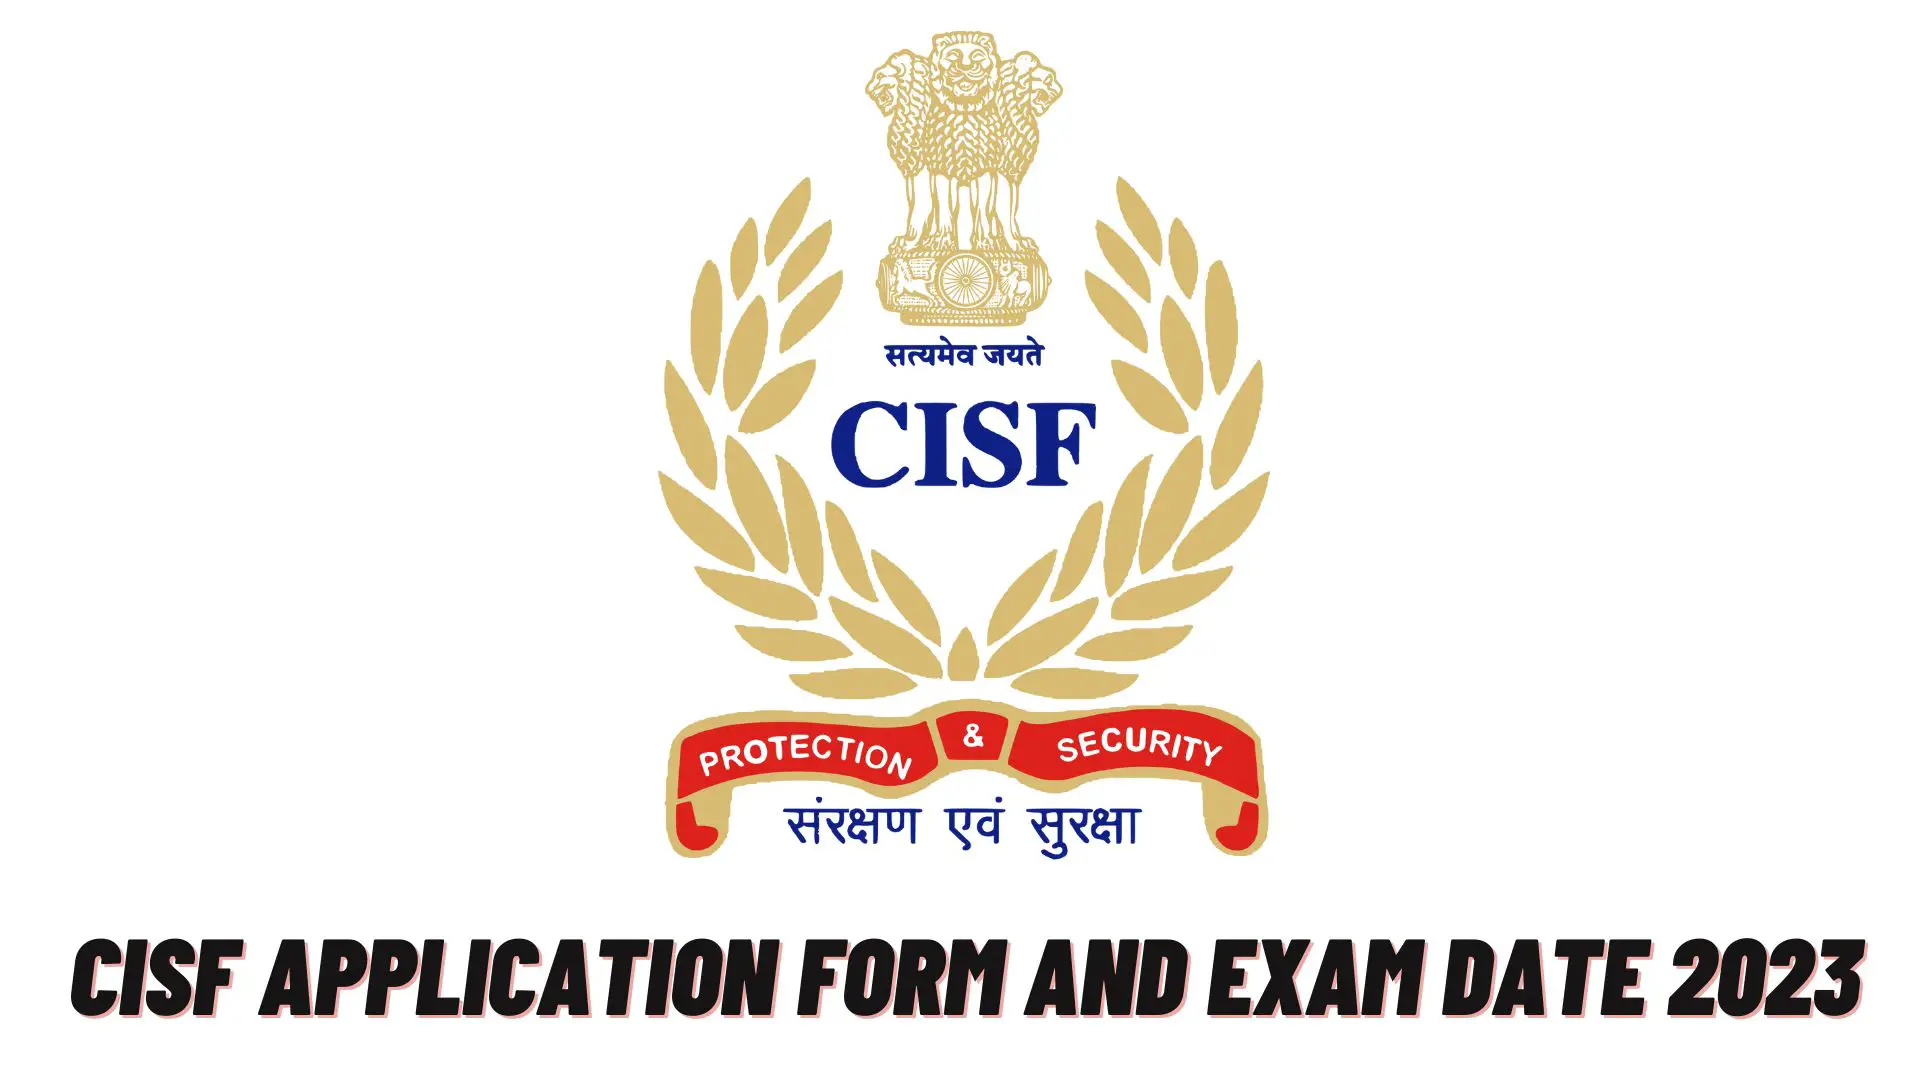 CISF Application Form And Exam Date 2023